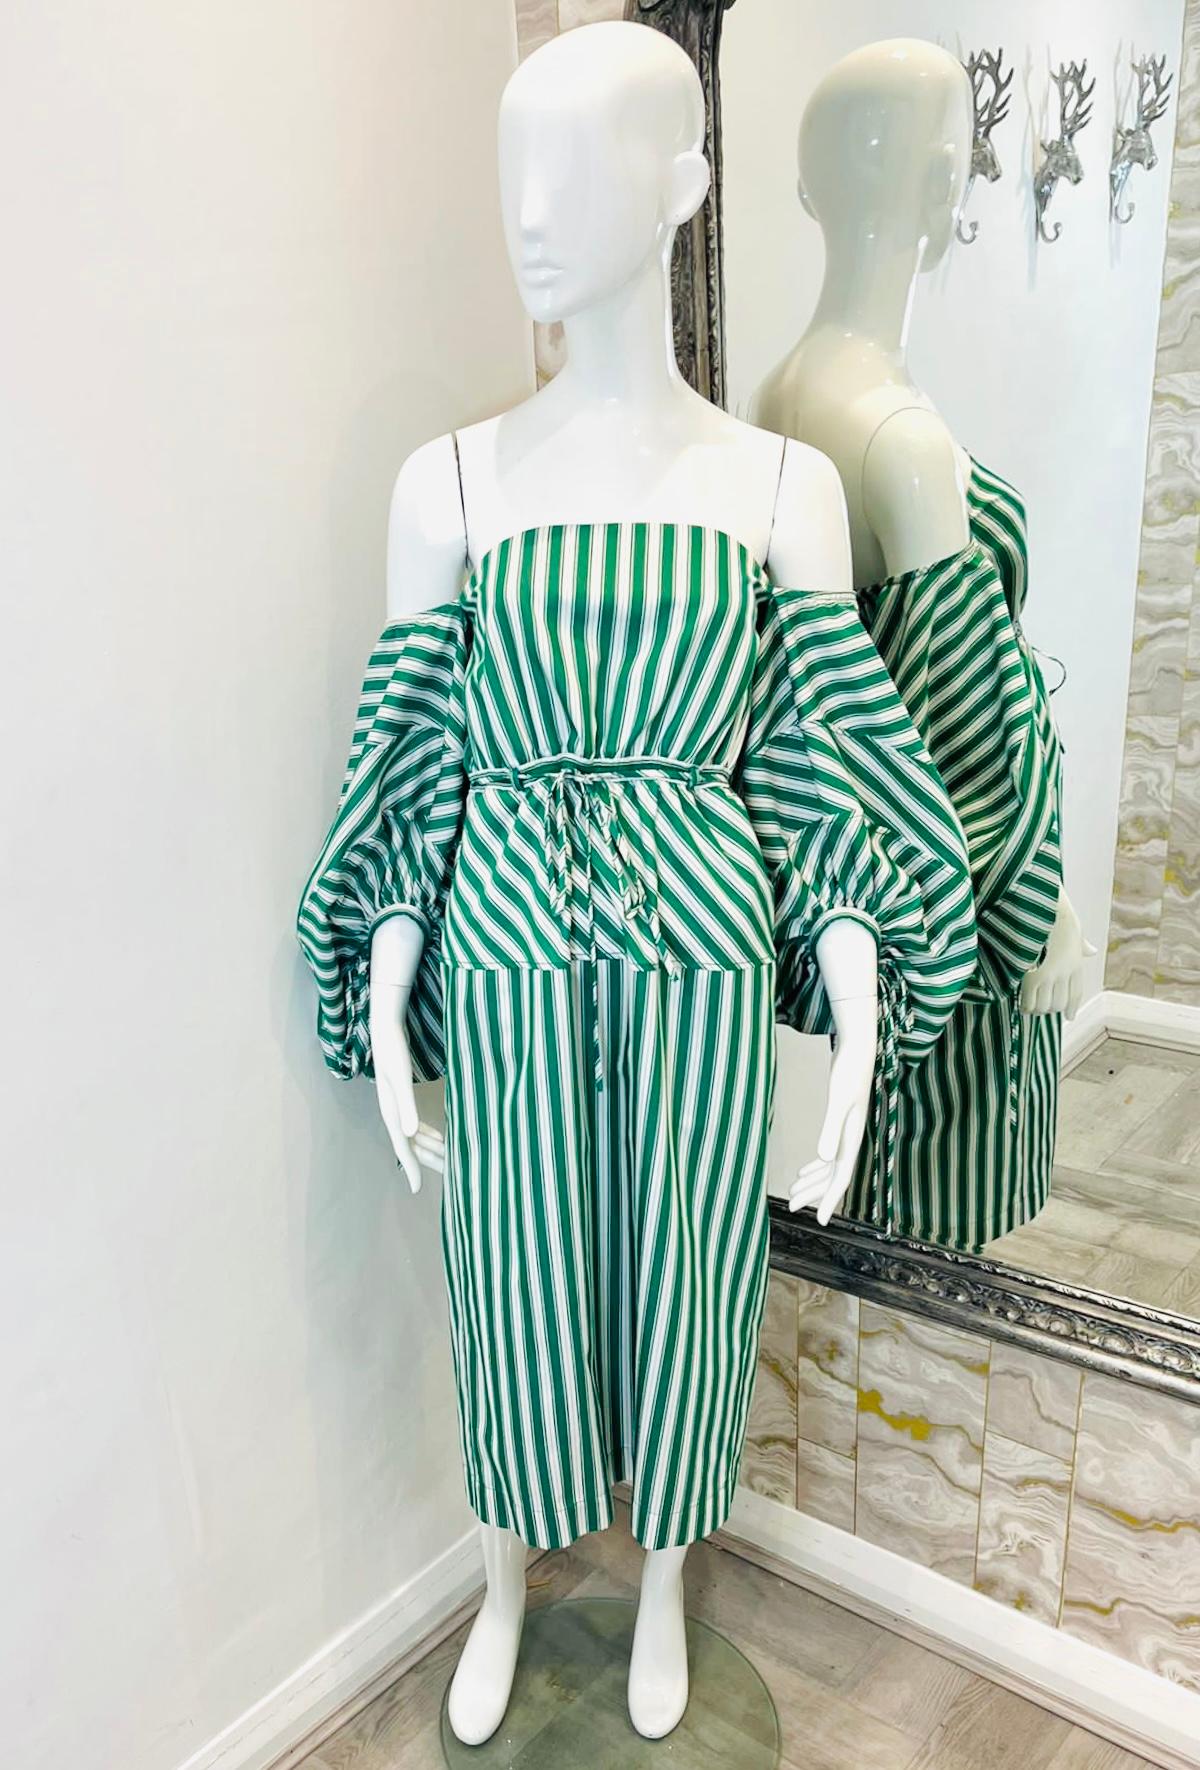 Rosie Assoulin Cotton Dress

Green midi dress designed with white stripe pattern.

Detailed with off-shoulder neckline and balloon sleeves.

Featuring self-tie belt with elasticated waistband and back centre slit. Rrp £1135

Size – S (Label missing